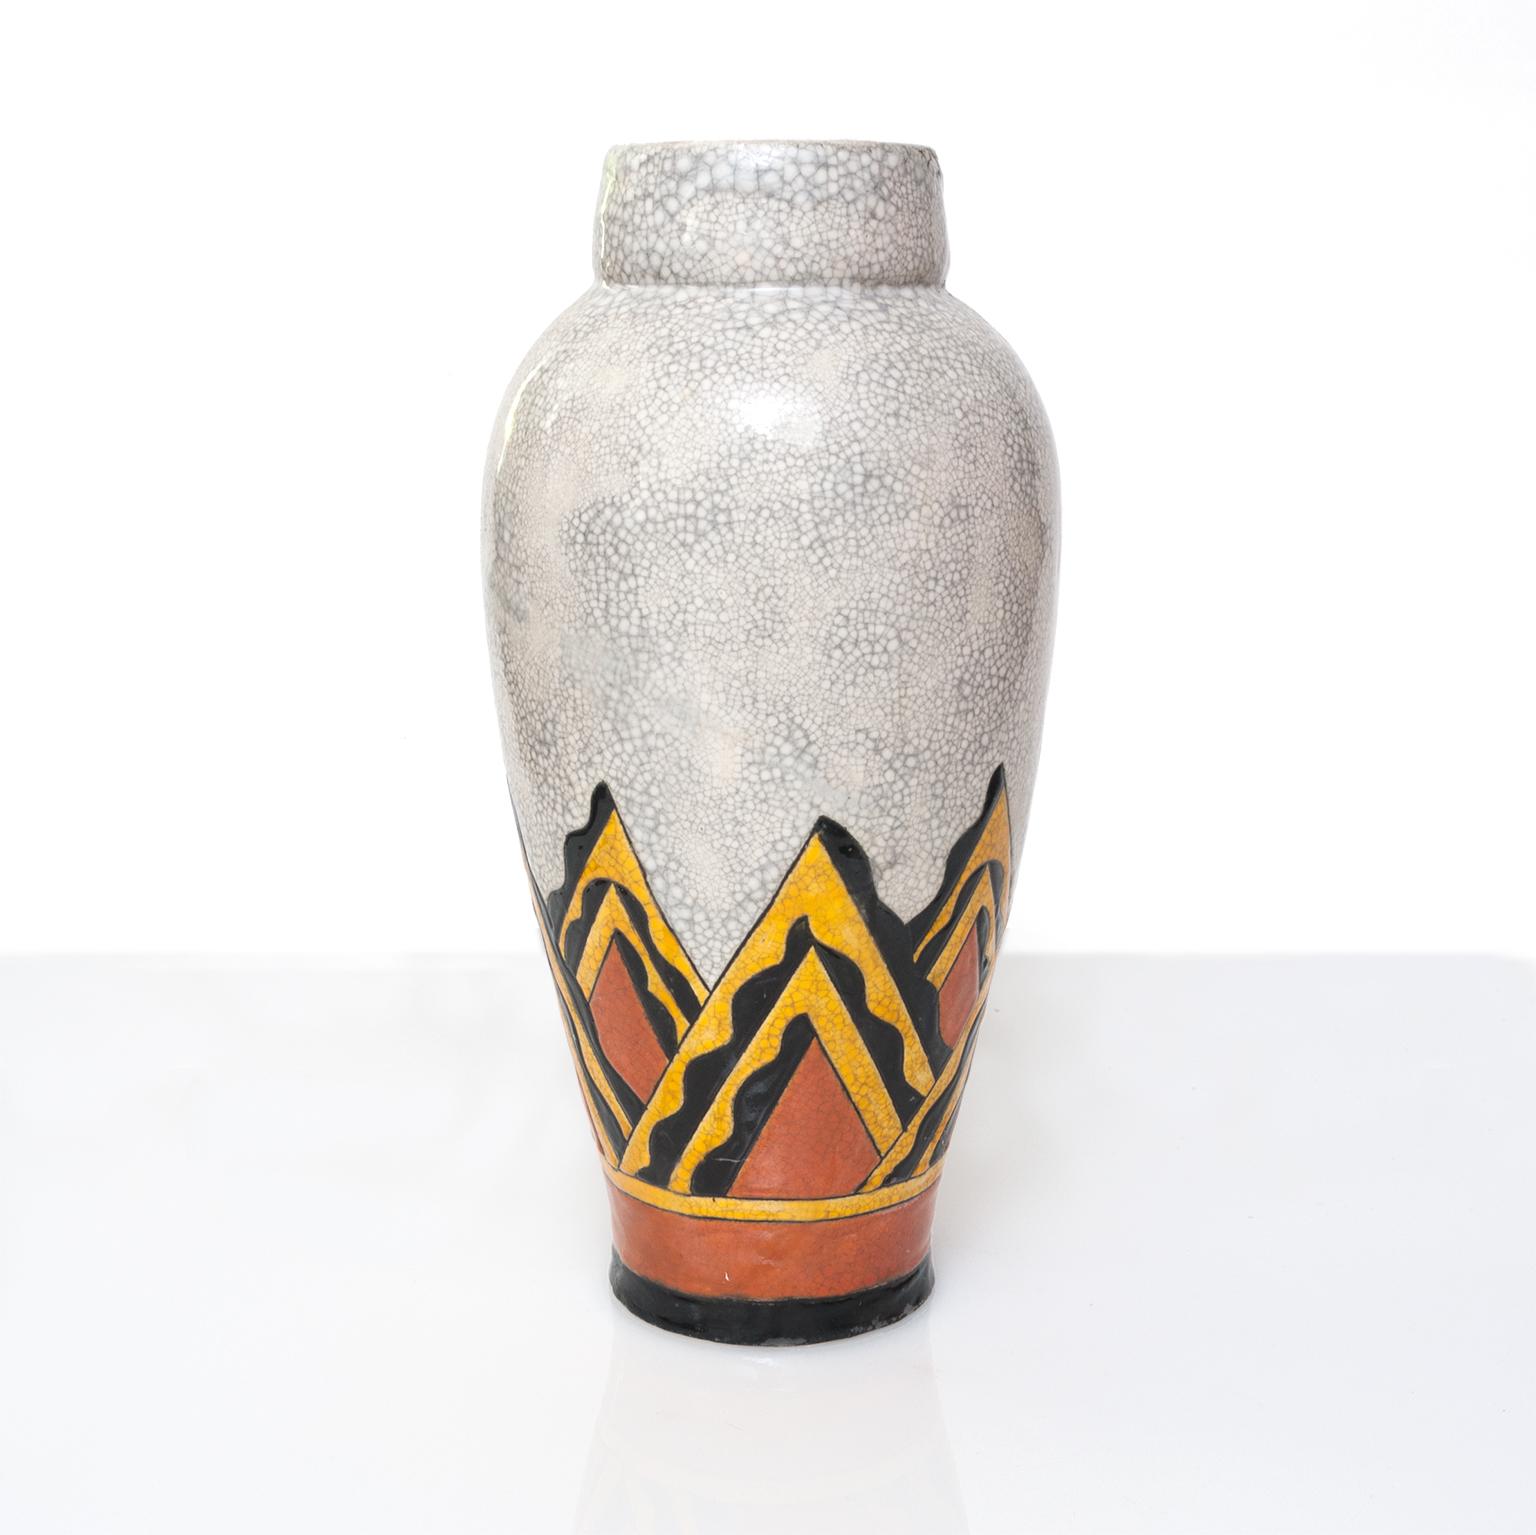 A tall beautifully glazed and decorated Art Deco ceramic vase by Charles Catteau for the Belgium company Boch Freres. 
Height: 18